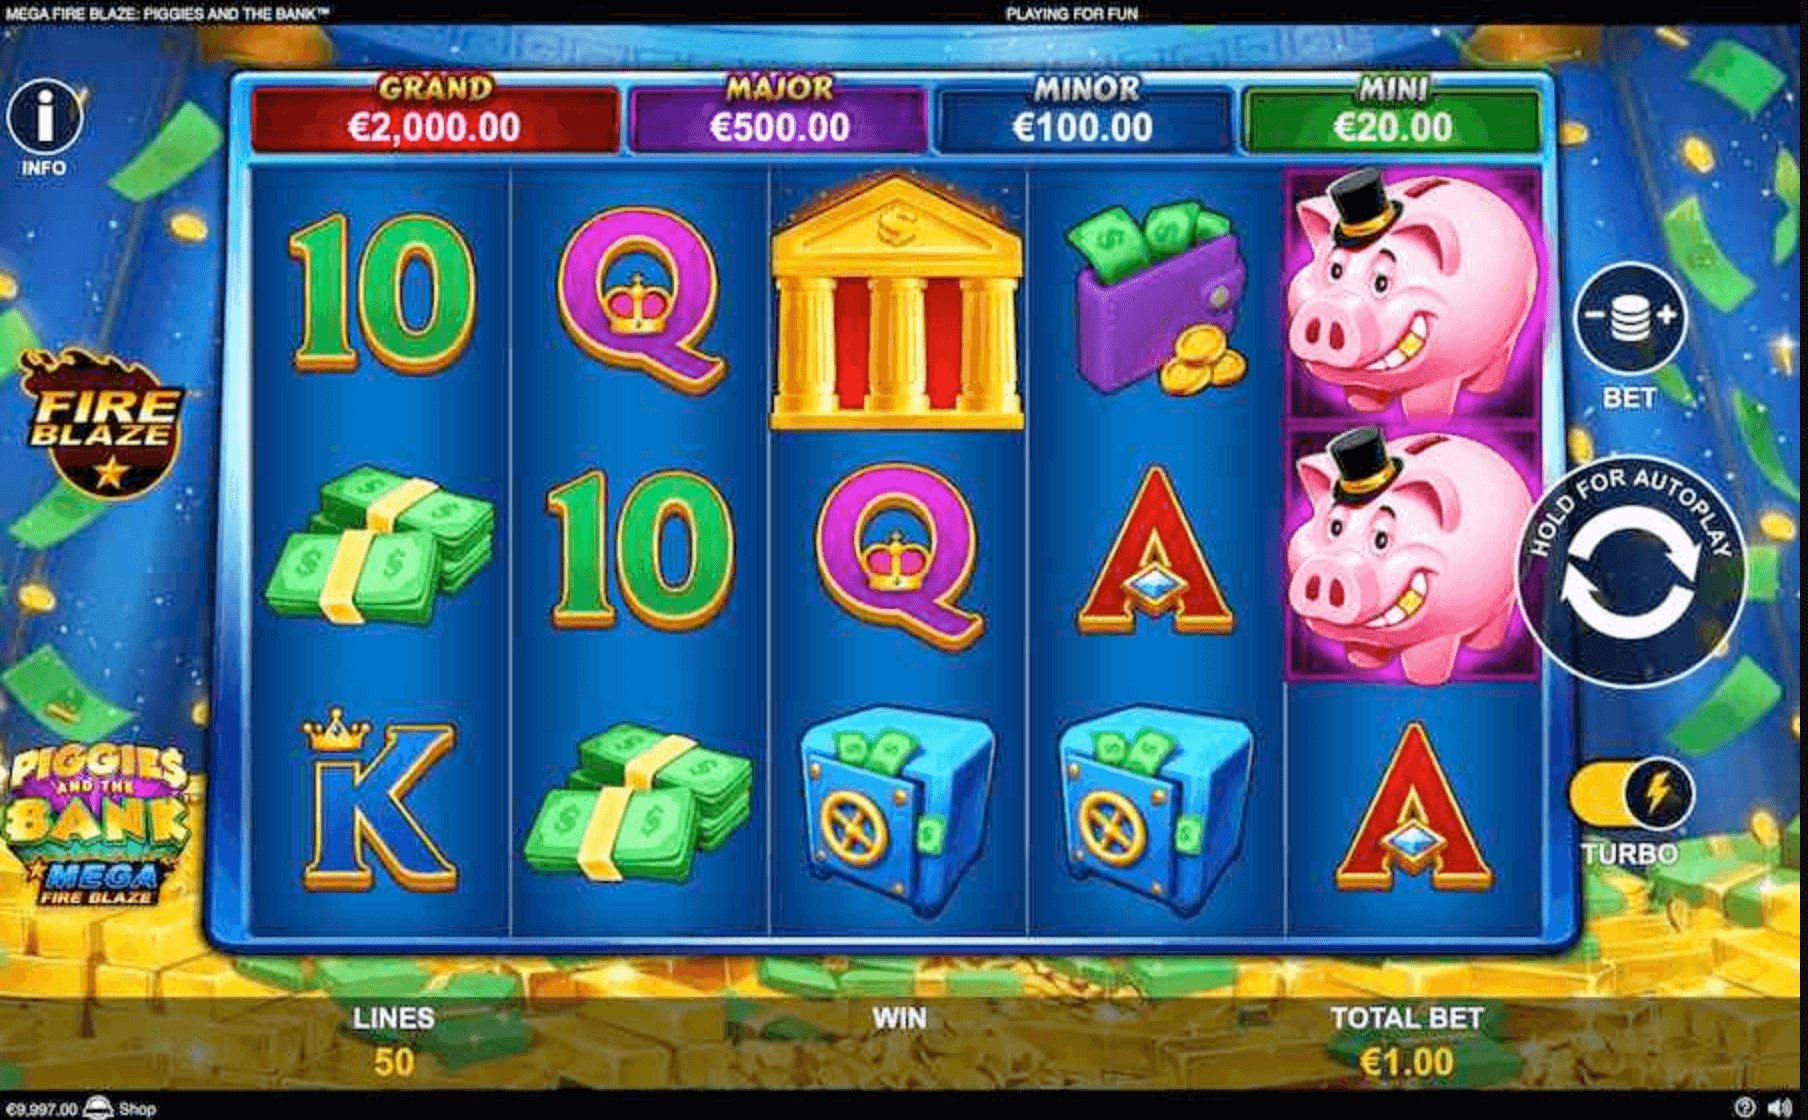 Piggies and the bank  Spel proces